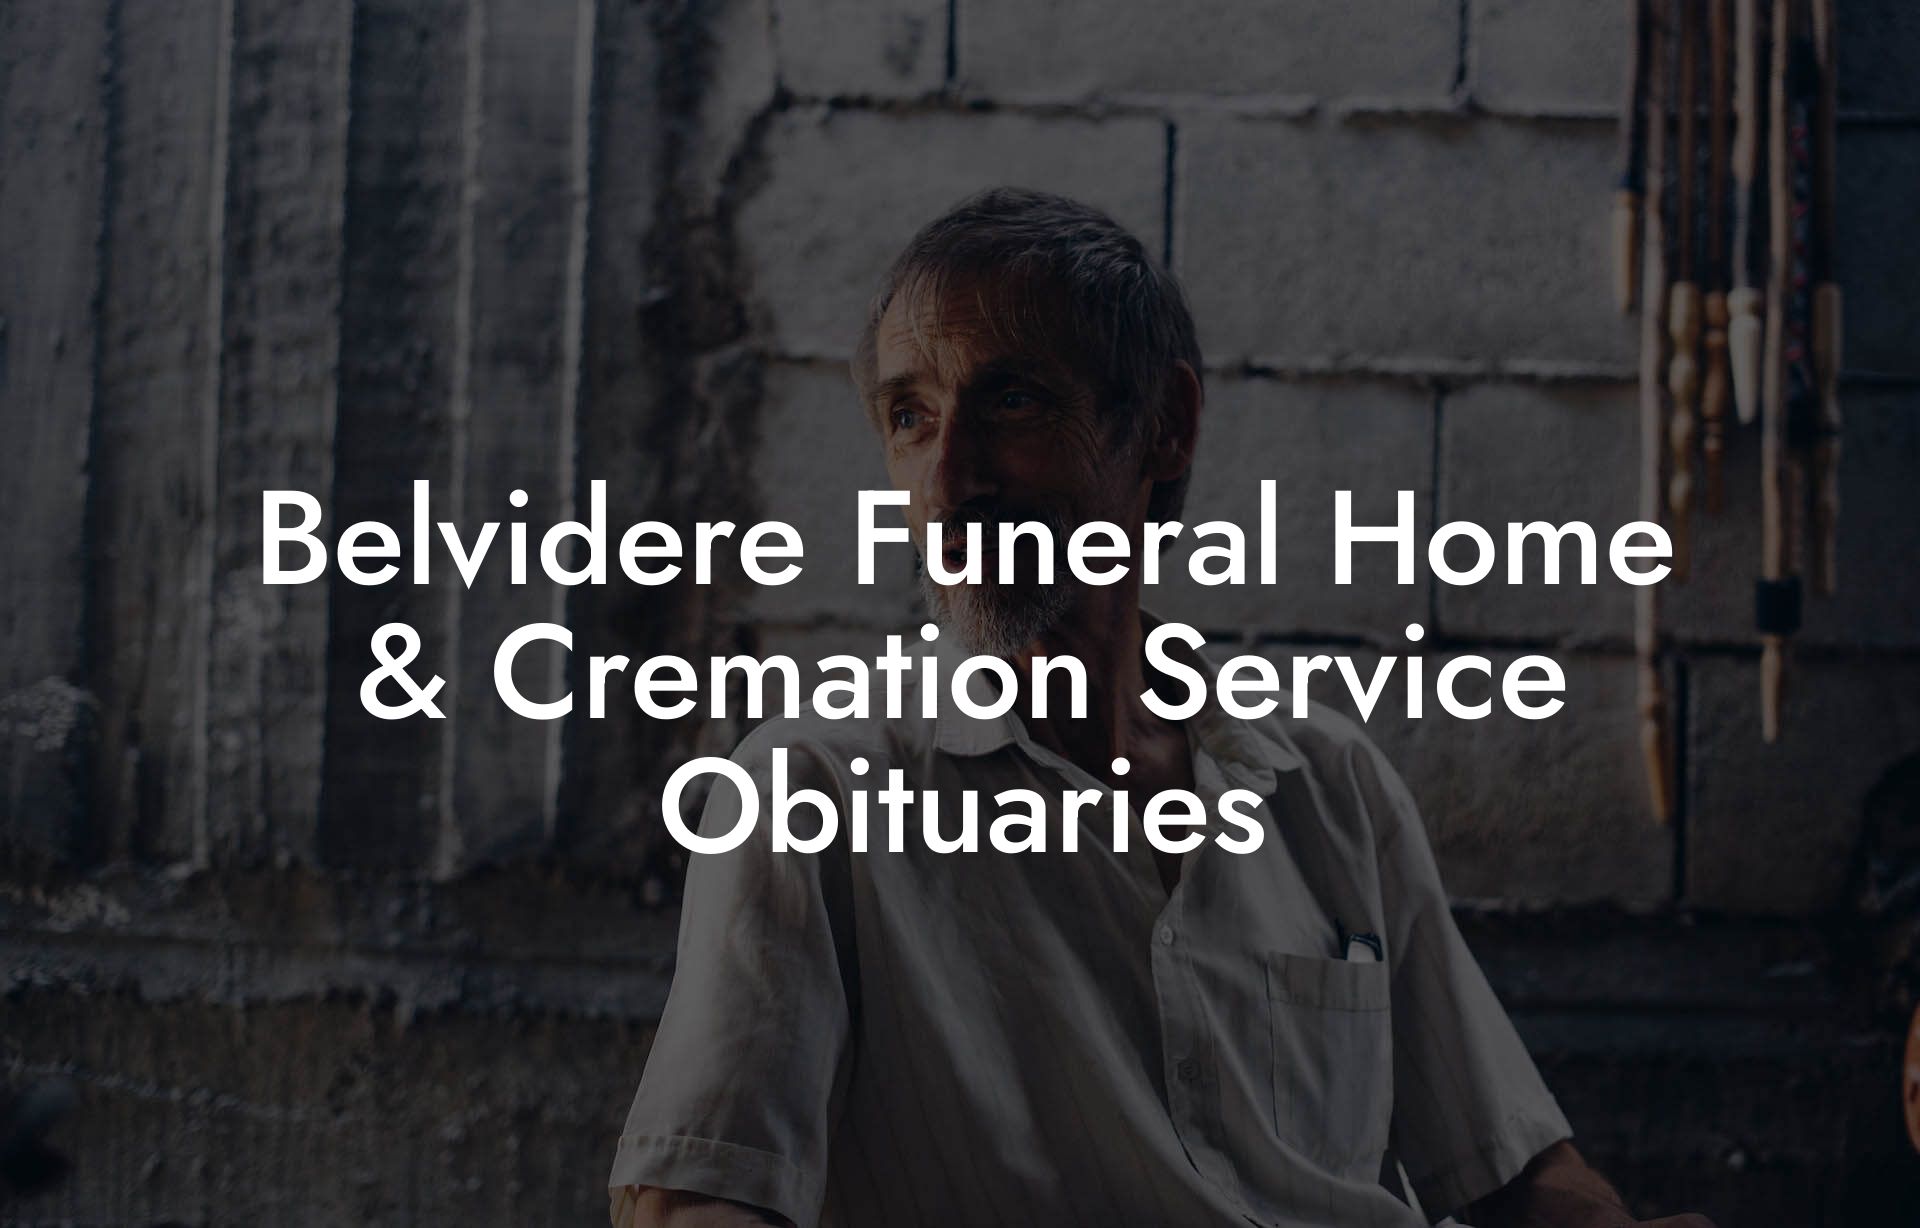 Belvidere Funeral Home & Cremation Service Obituaries